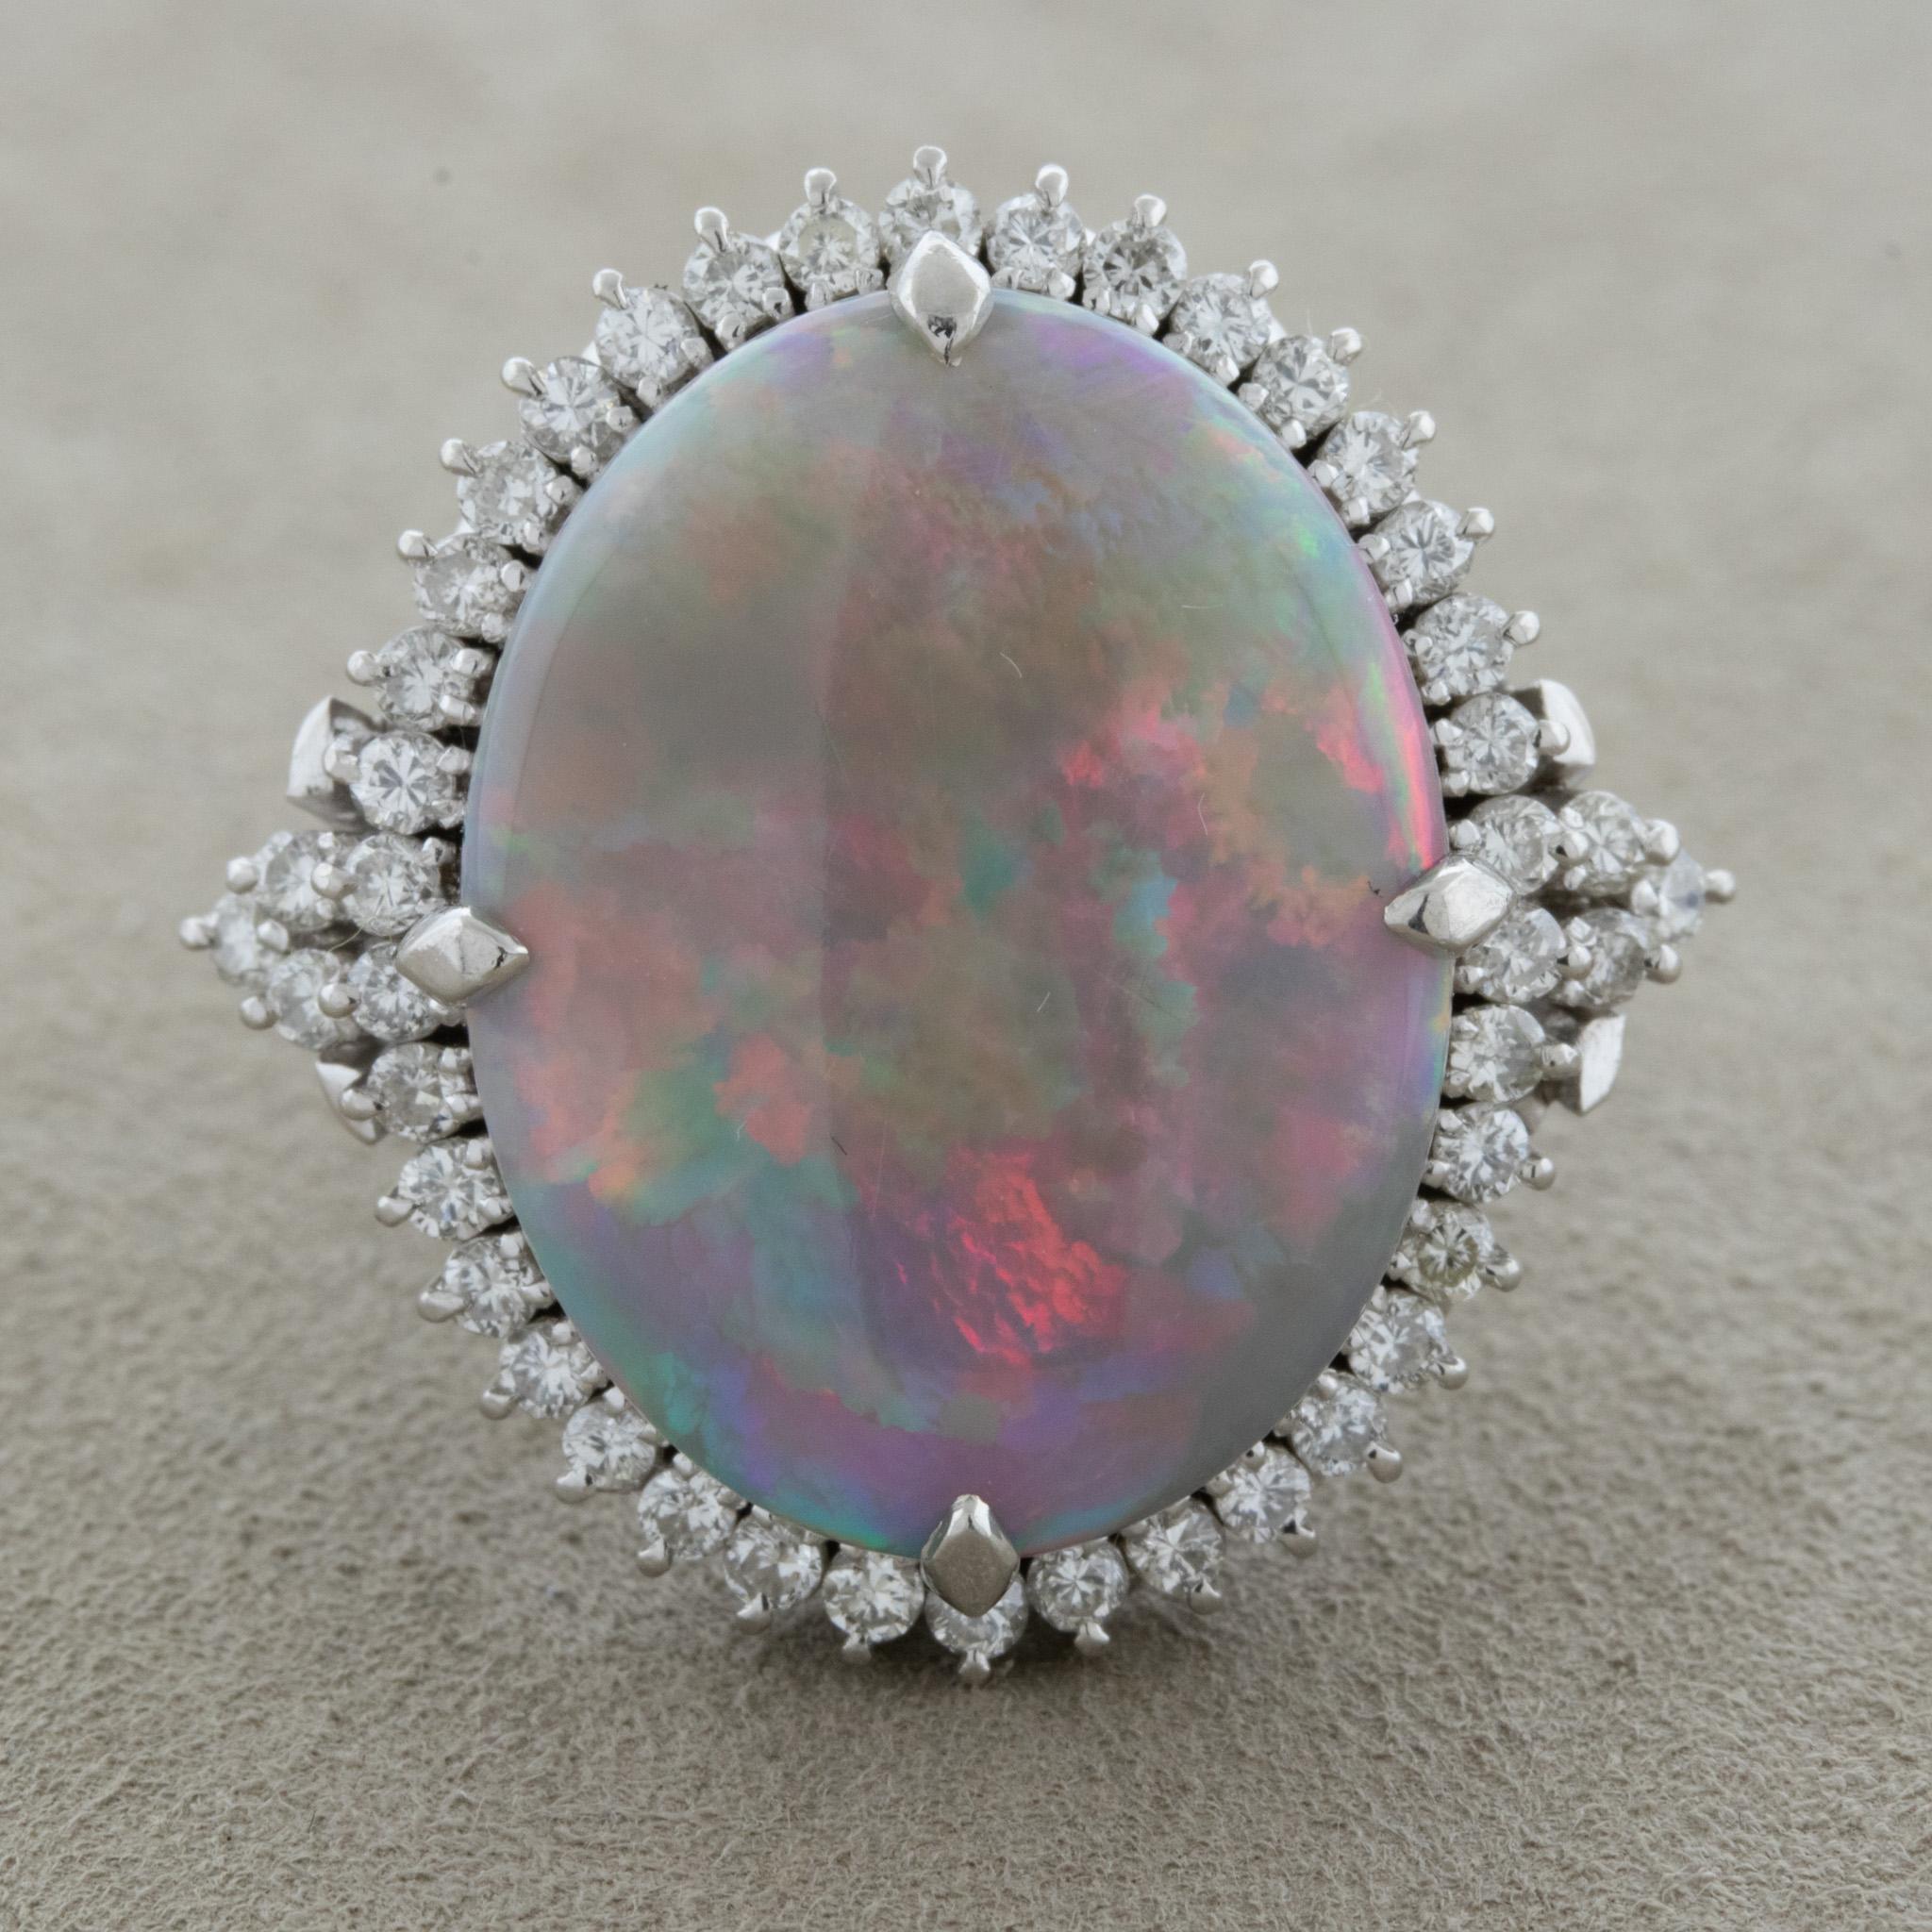 A large and impressive Australian opal weighing 9.37 carats takes center stage and puts on a show! It has great play-of-color as primarily red, along with blue and green, flash across the stone. It is complemented by 0.85 carats of round